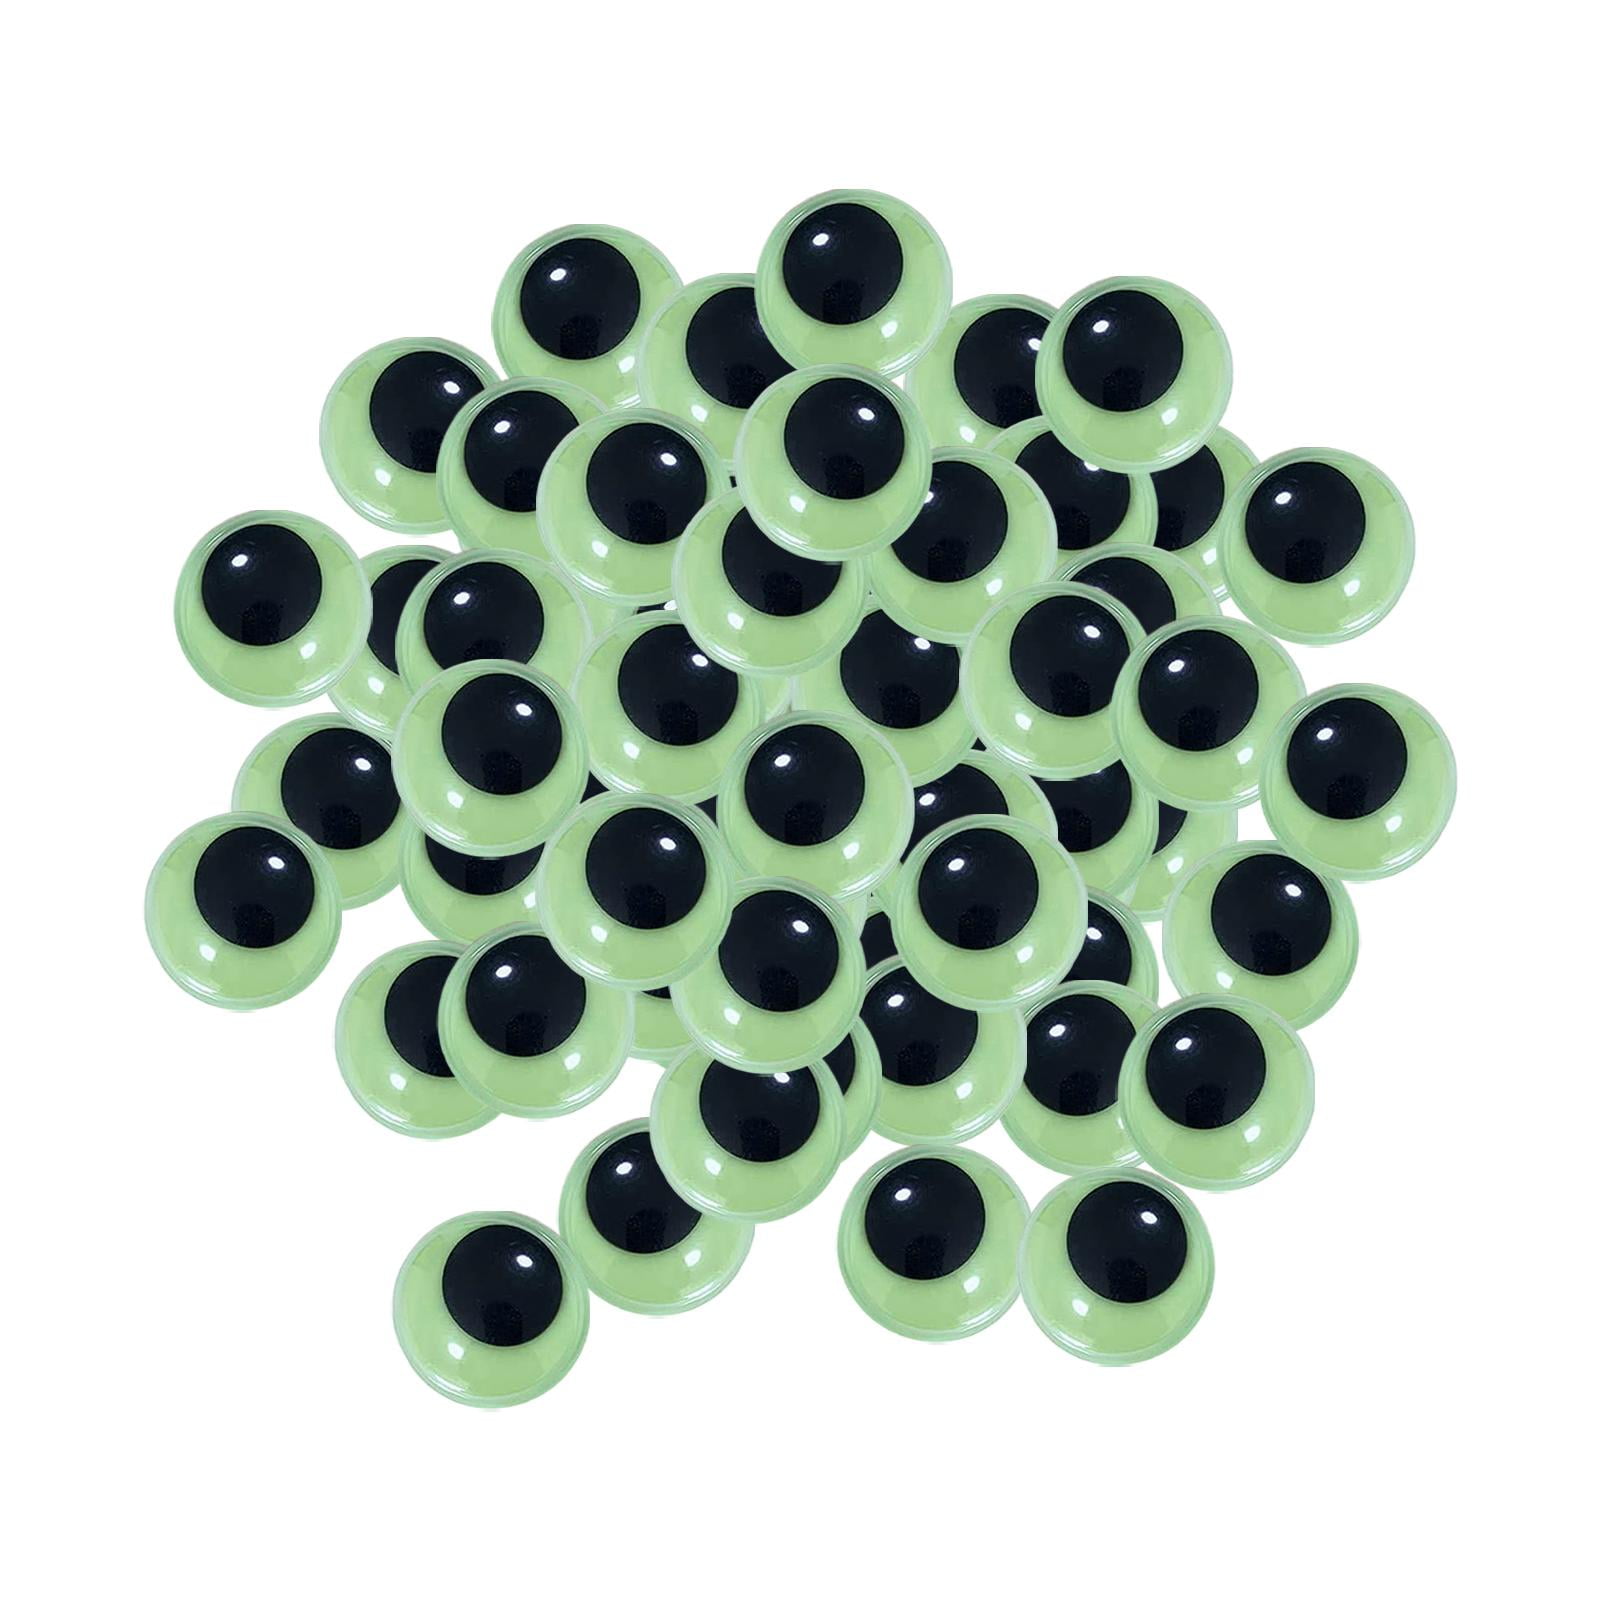  4 Pcs Luminous Giant Wiggle Eyes Halloween Self Adhesive Large  Eyes Glow in The Dark Big DIY Craft Eyes for Halloween Decoration Stickers  (5.9 inch/ 15 cm) : Arts, Crafts & Sewing